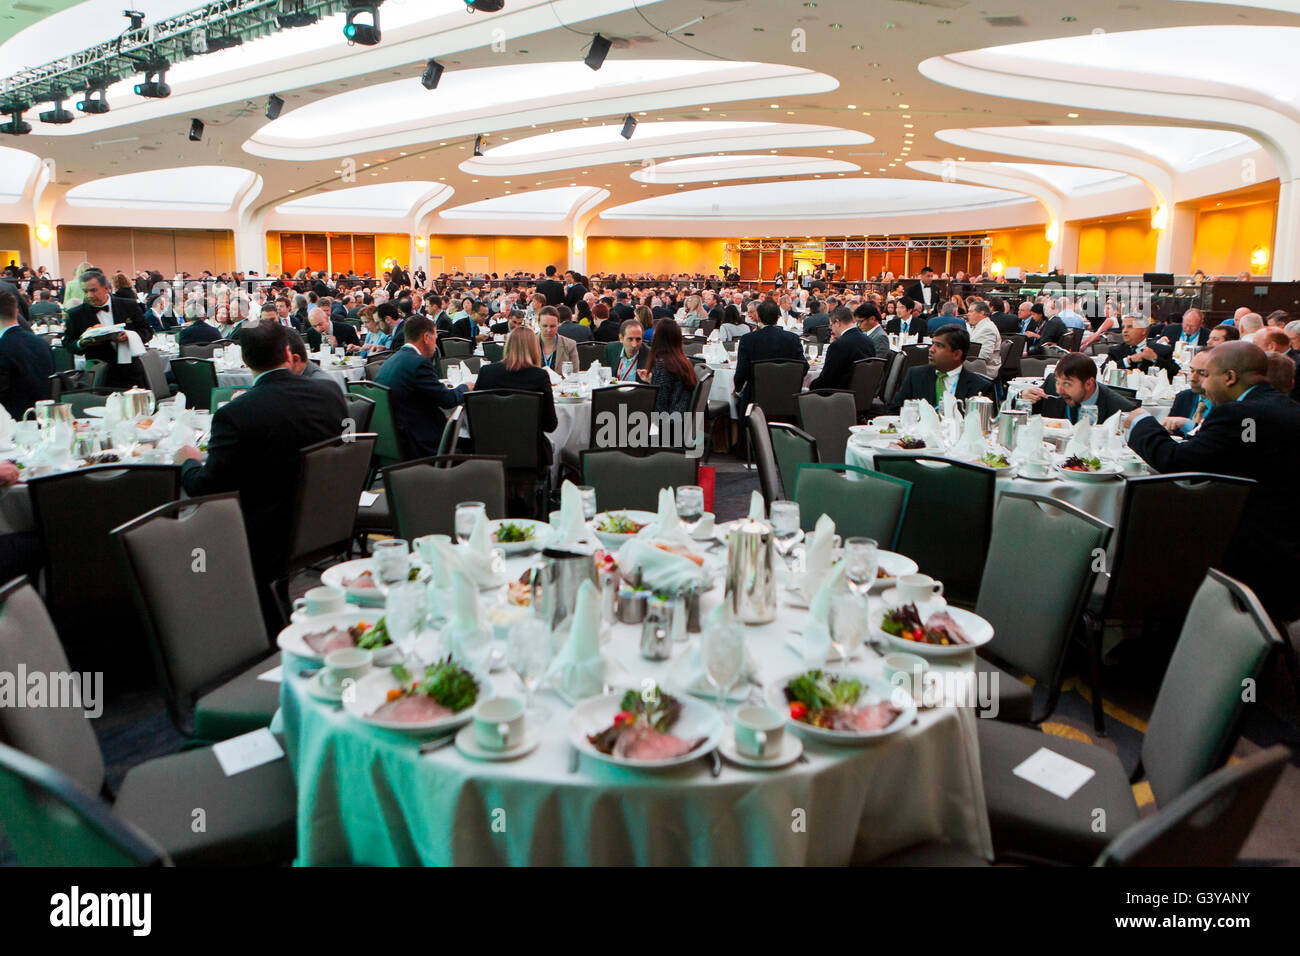 Banquet dining hall for large event at the Hilton Hotel - Washington, DC USA Stock Photo